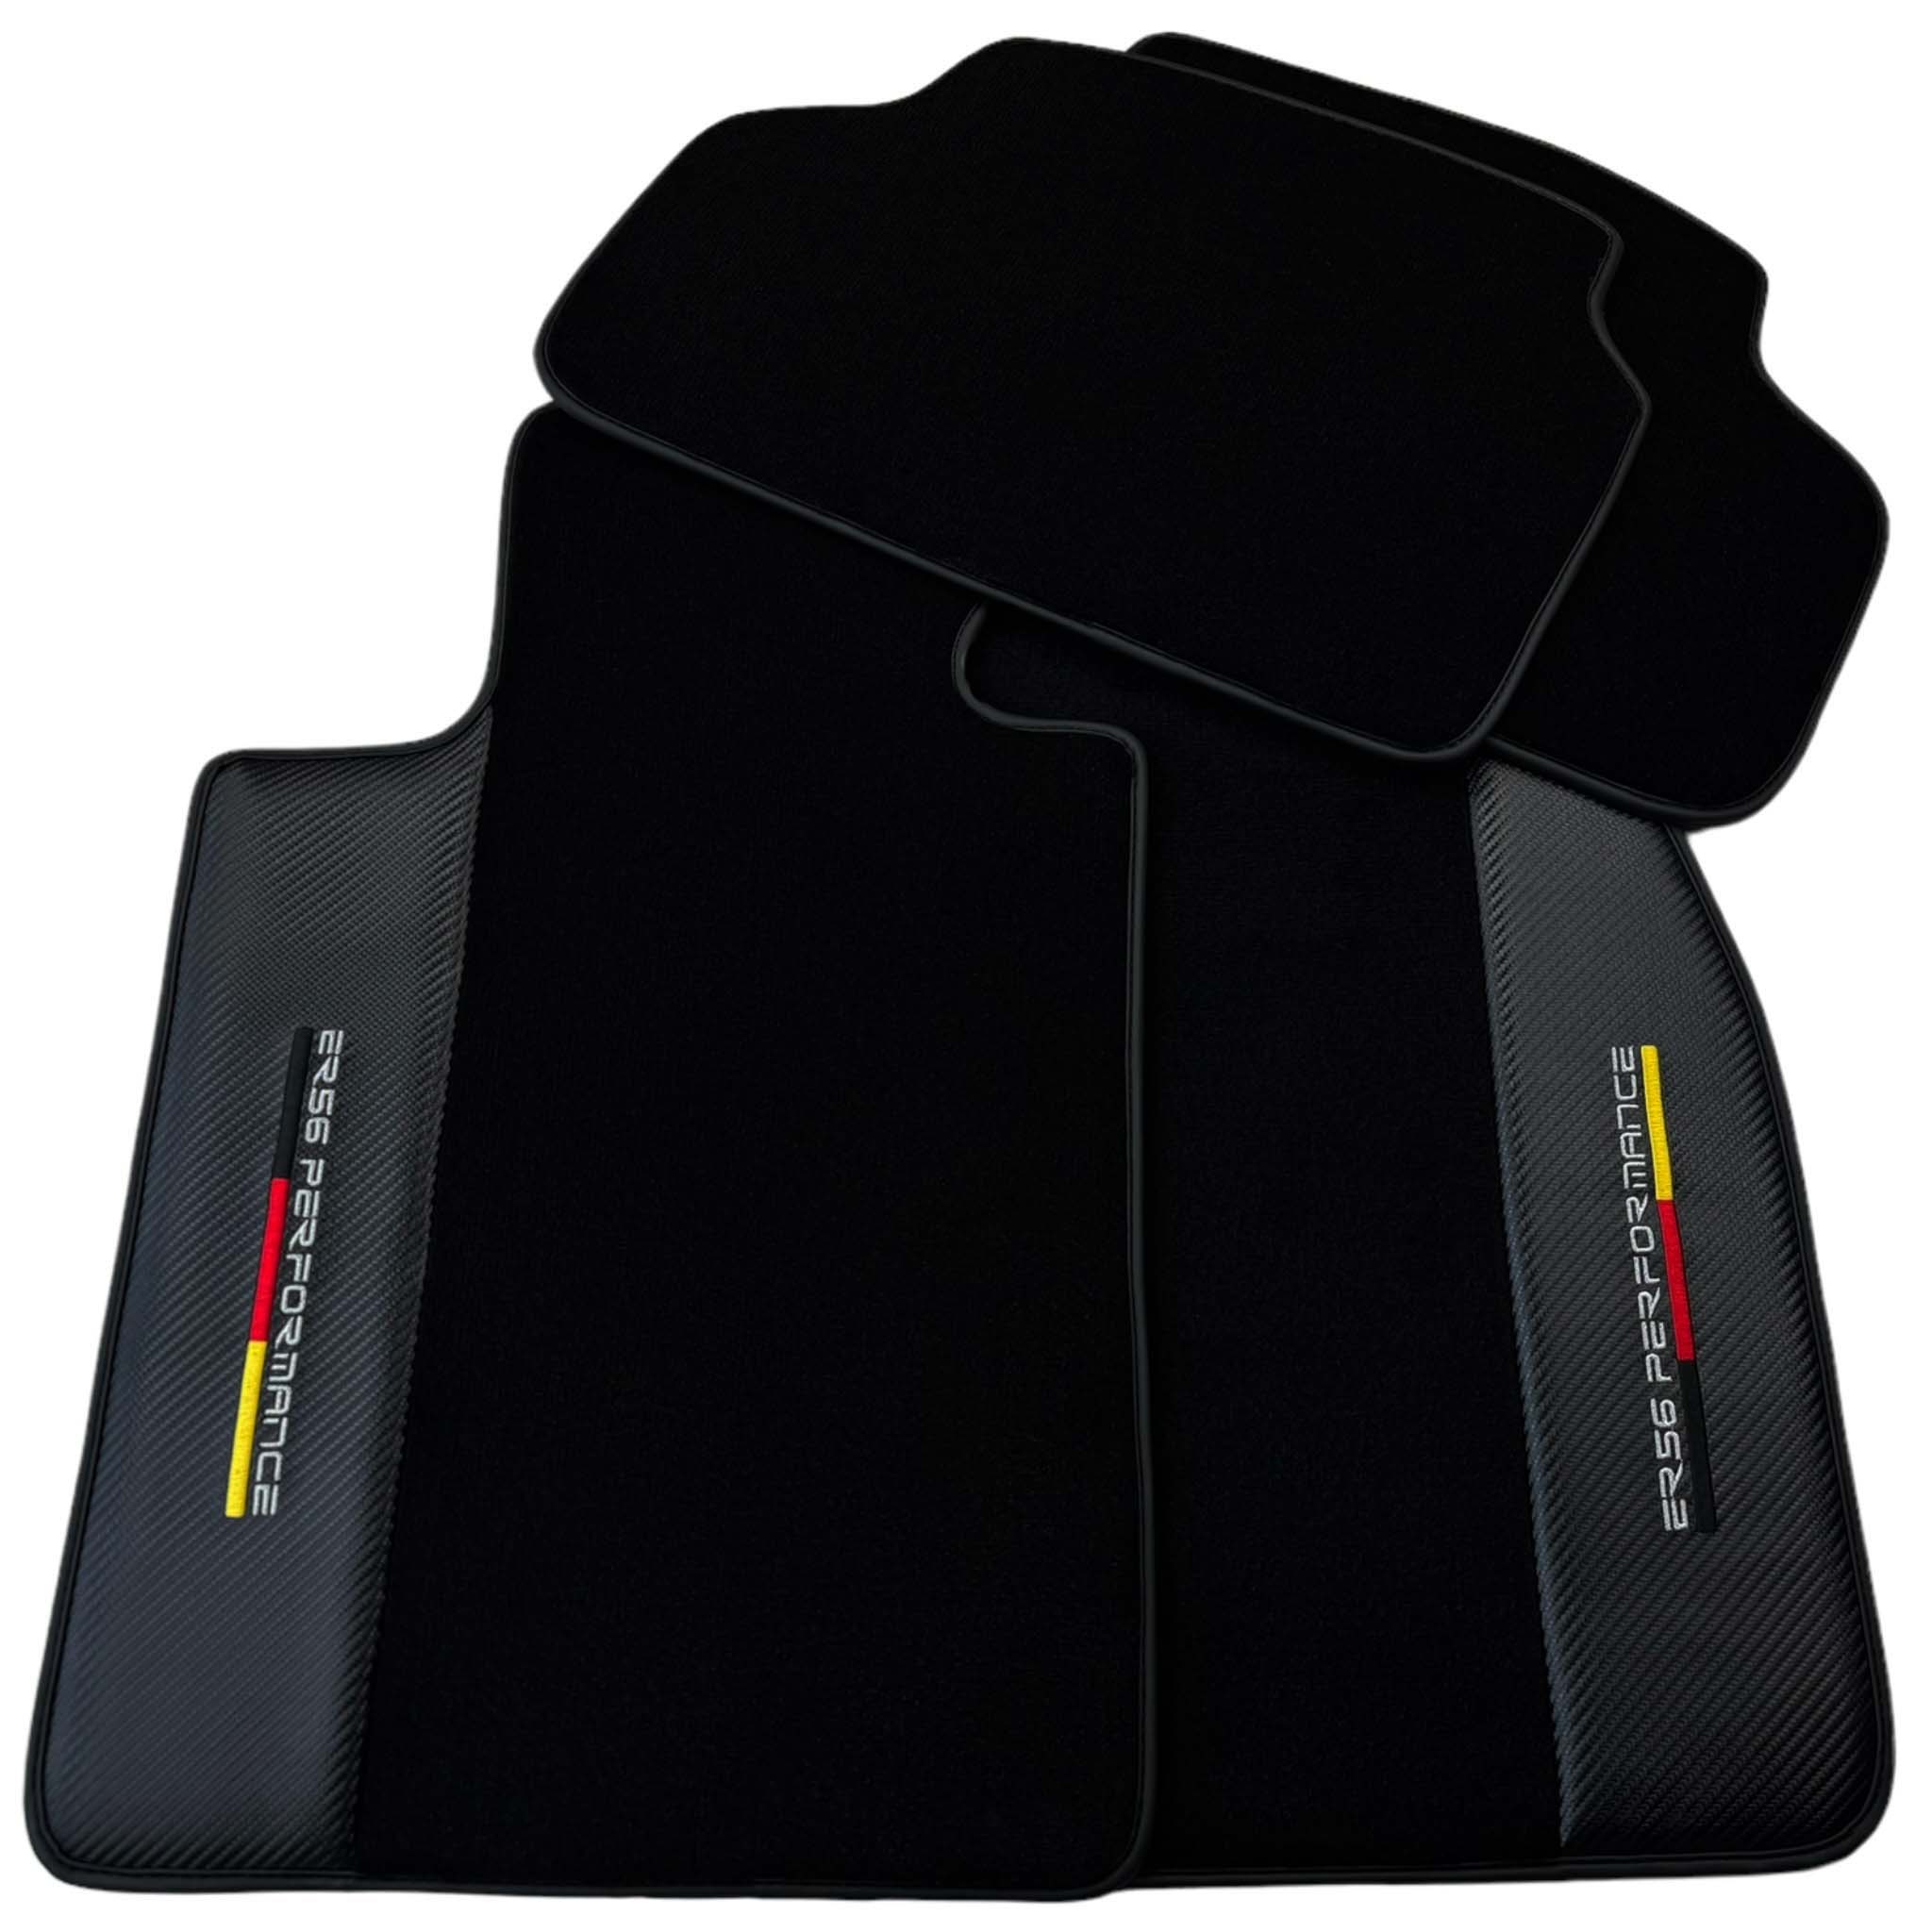 Black Floor Mats For BMW 3 Series E30 2-doors Coupe | ER56 Performance | Carbon Edition